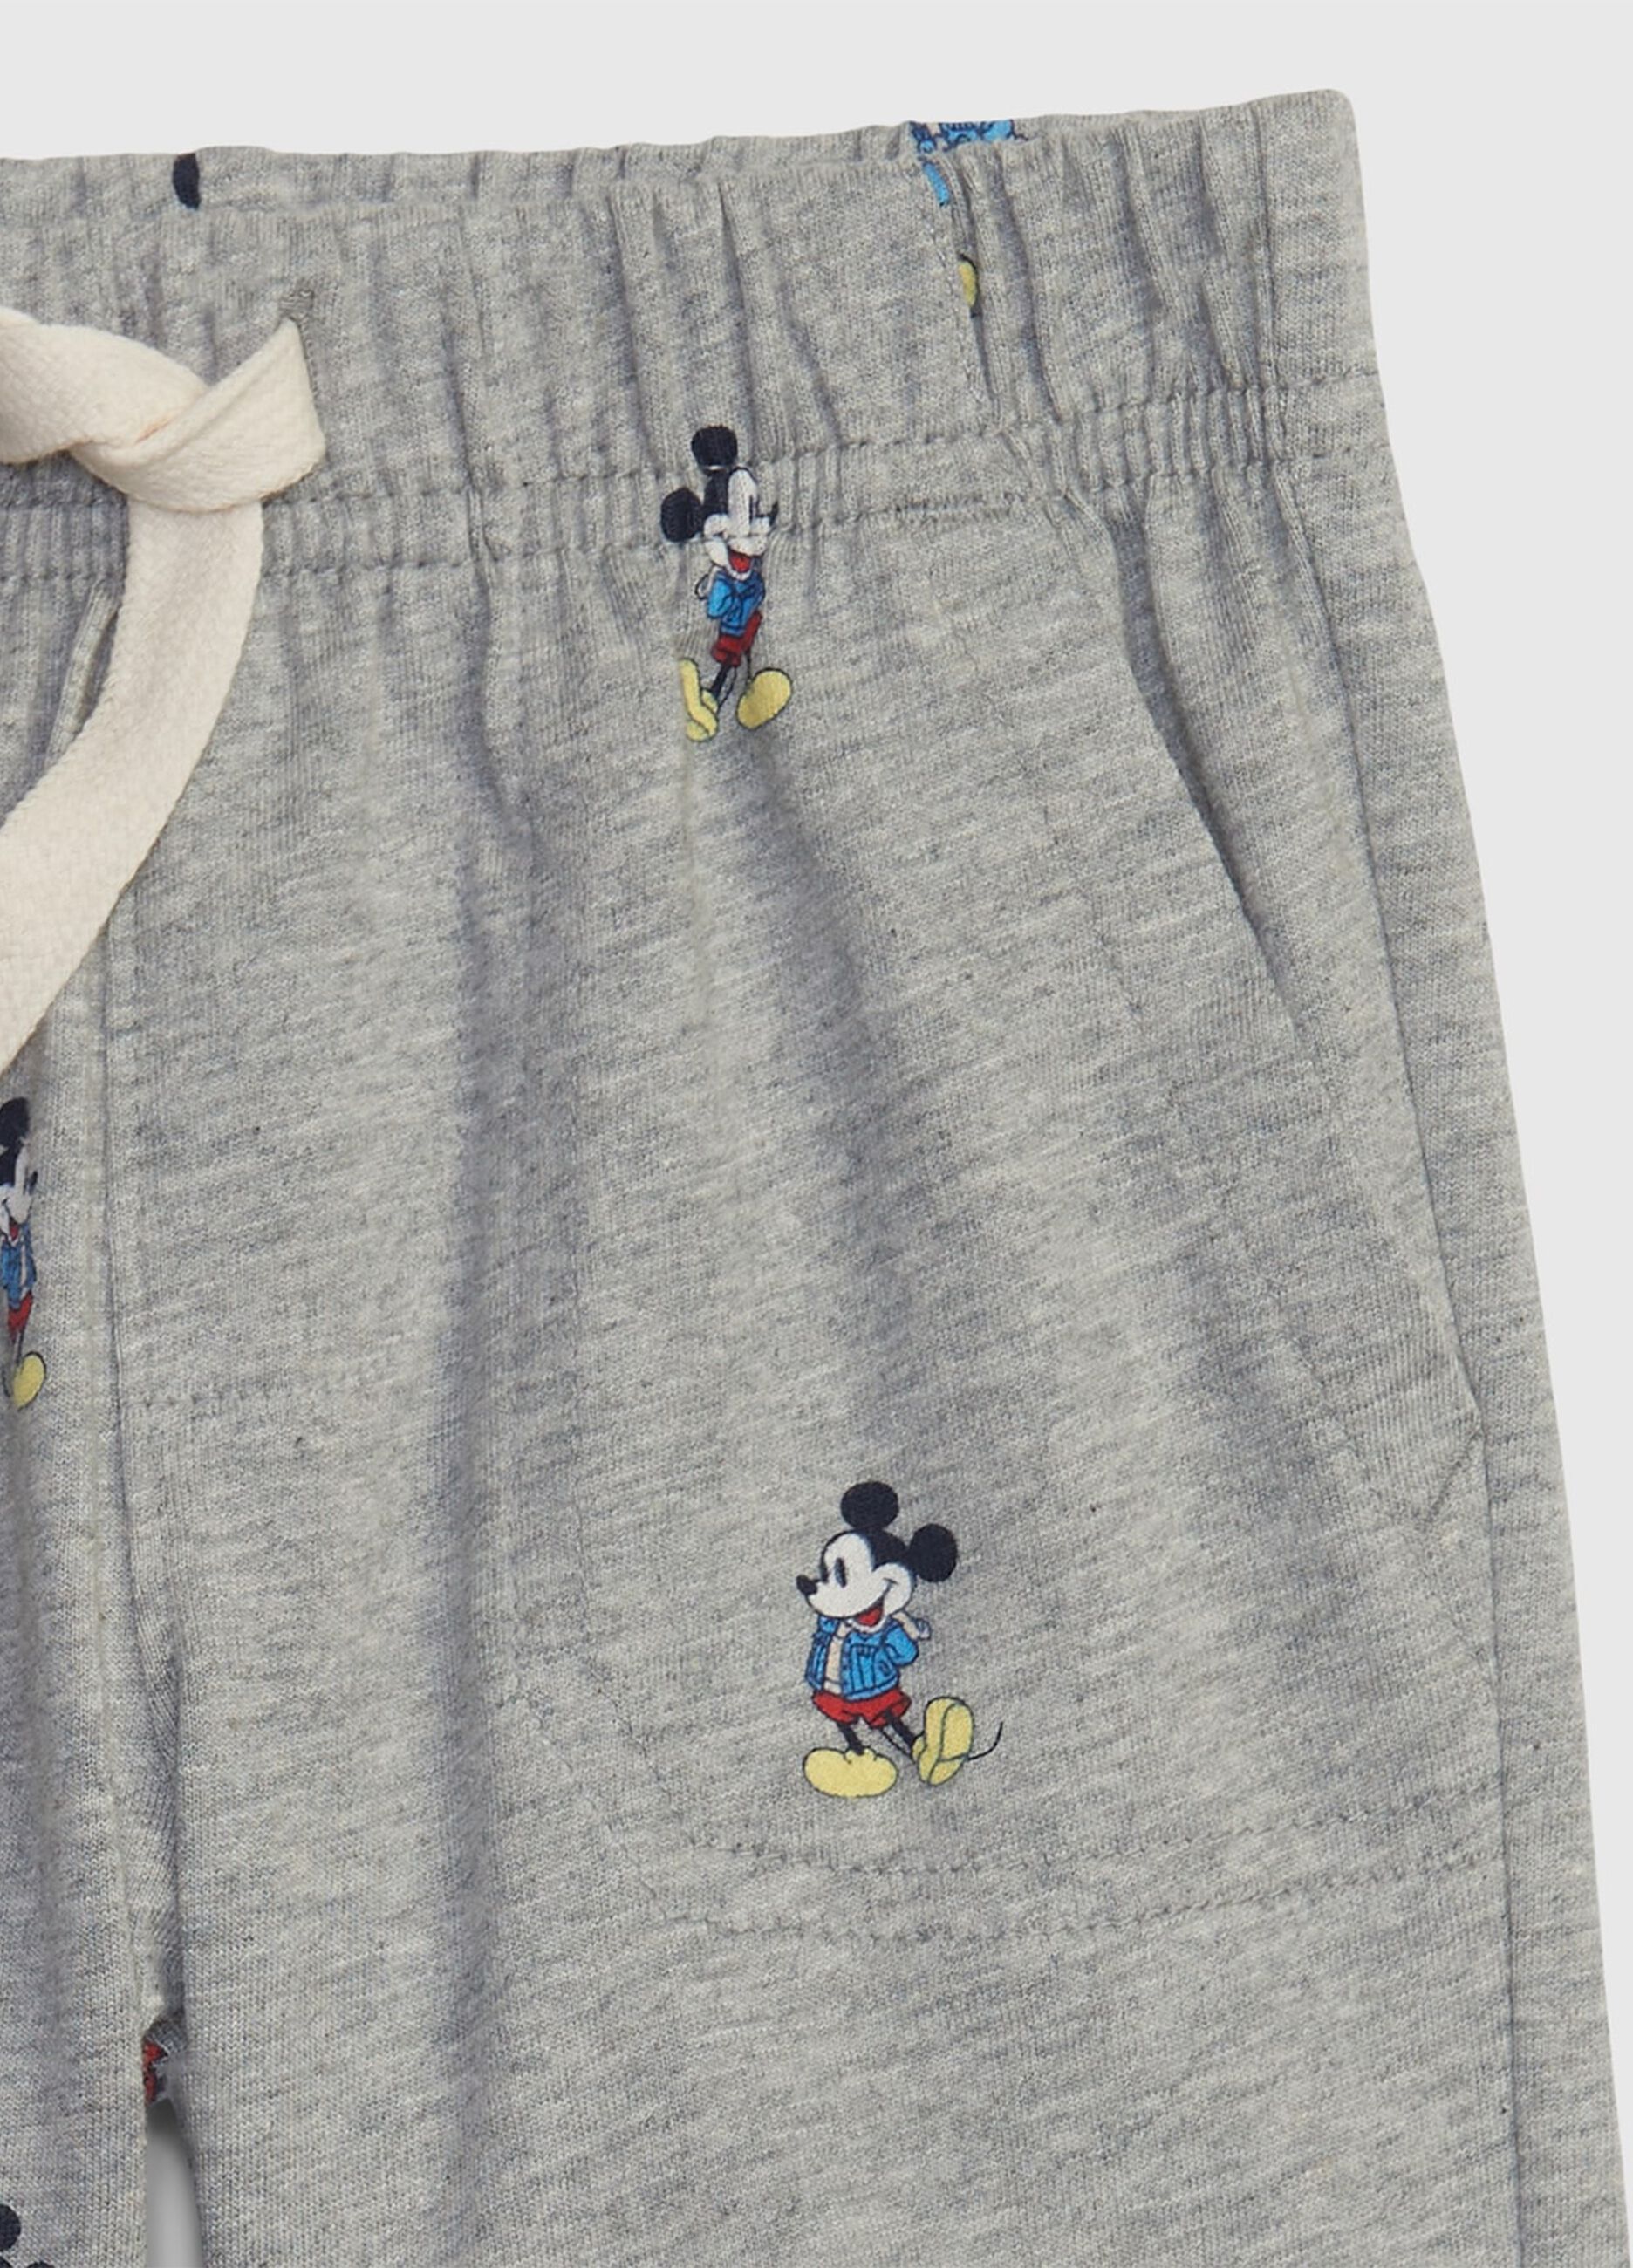 Shorts con coulisse stampa Disney Baby Topolino